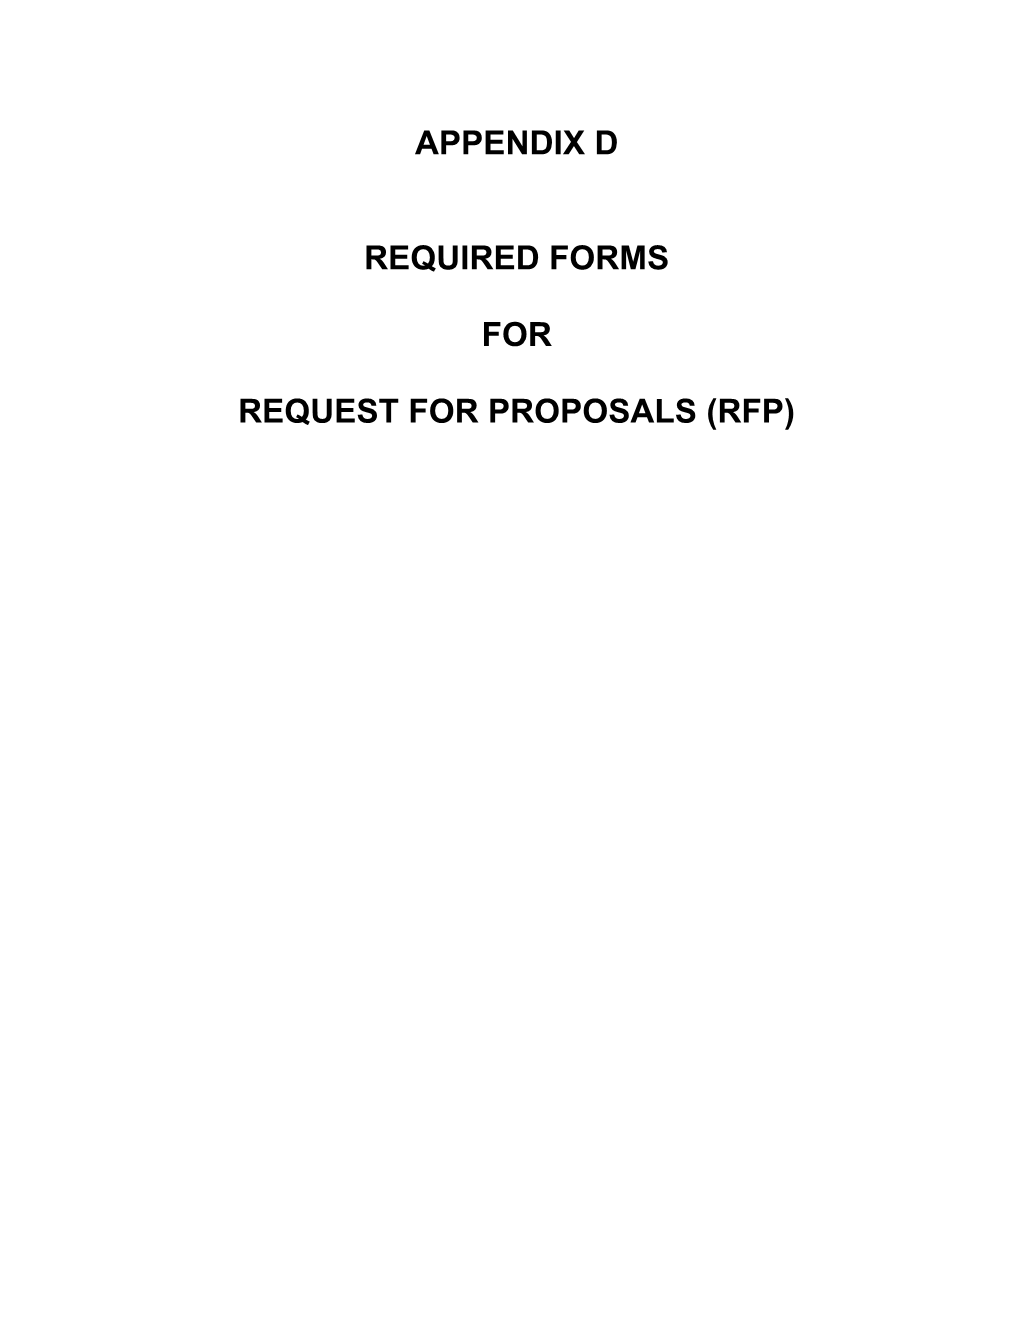 Request for Proposals (Rfp)